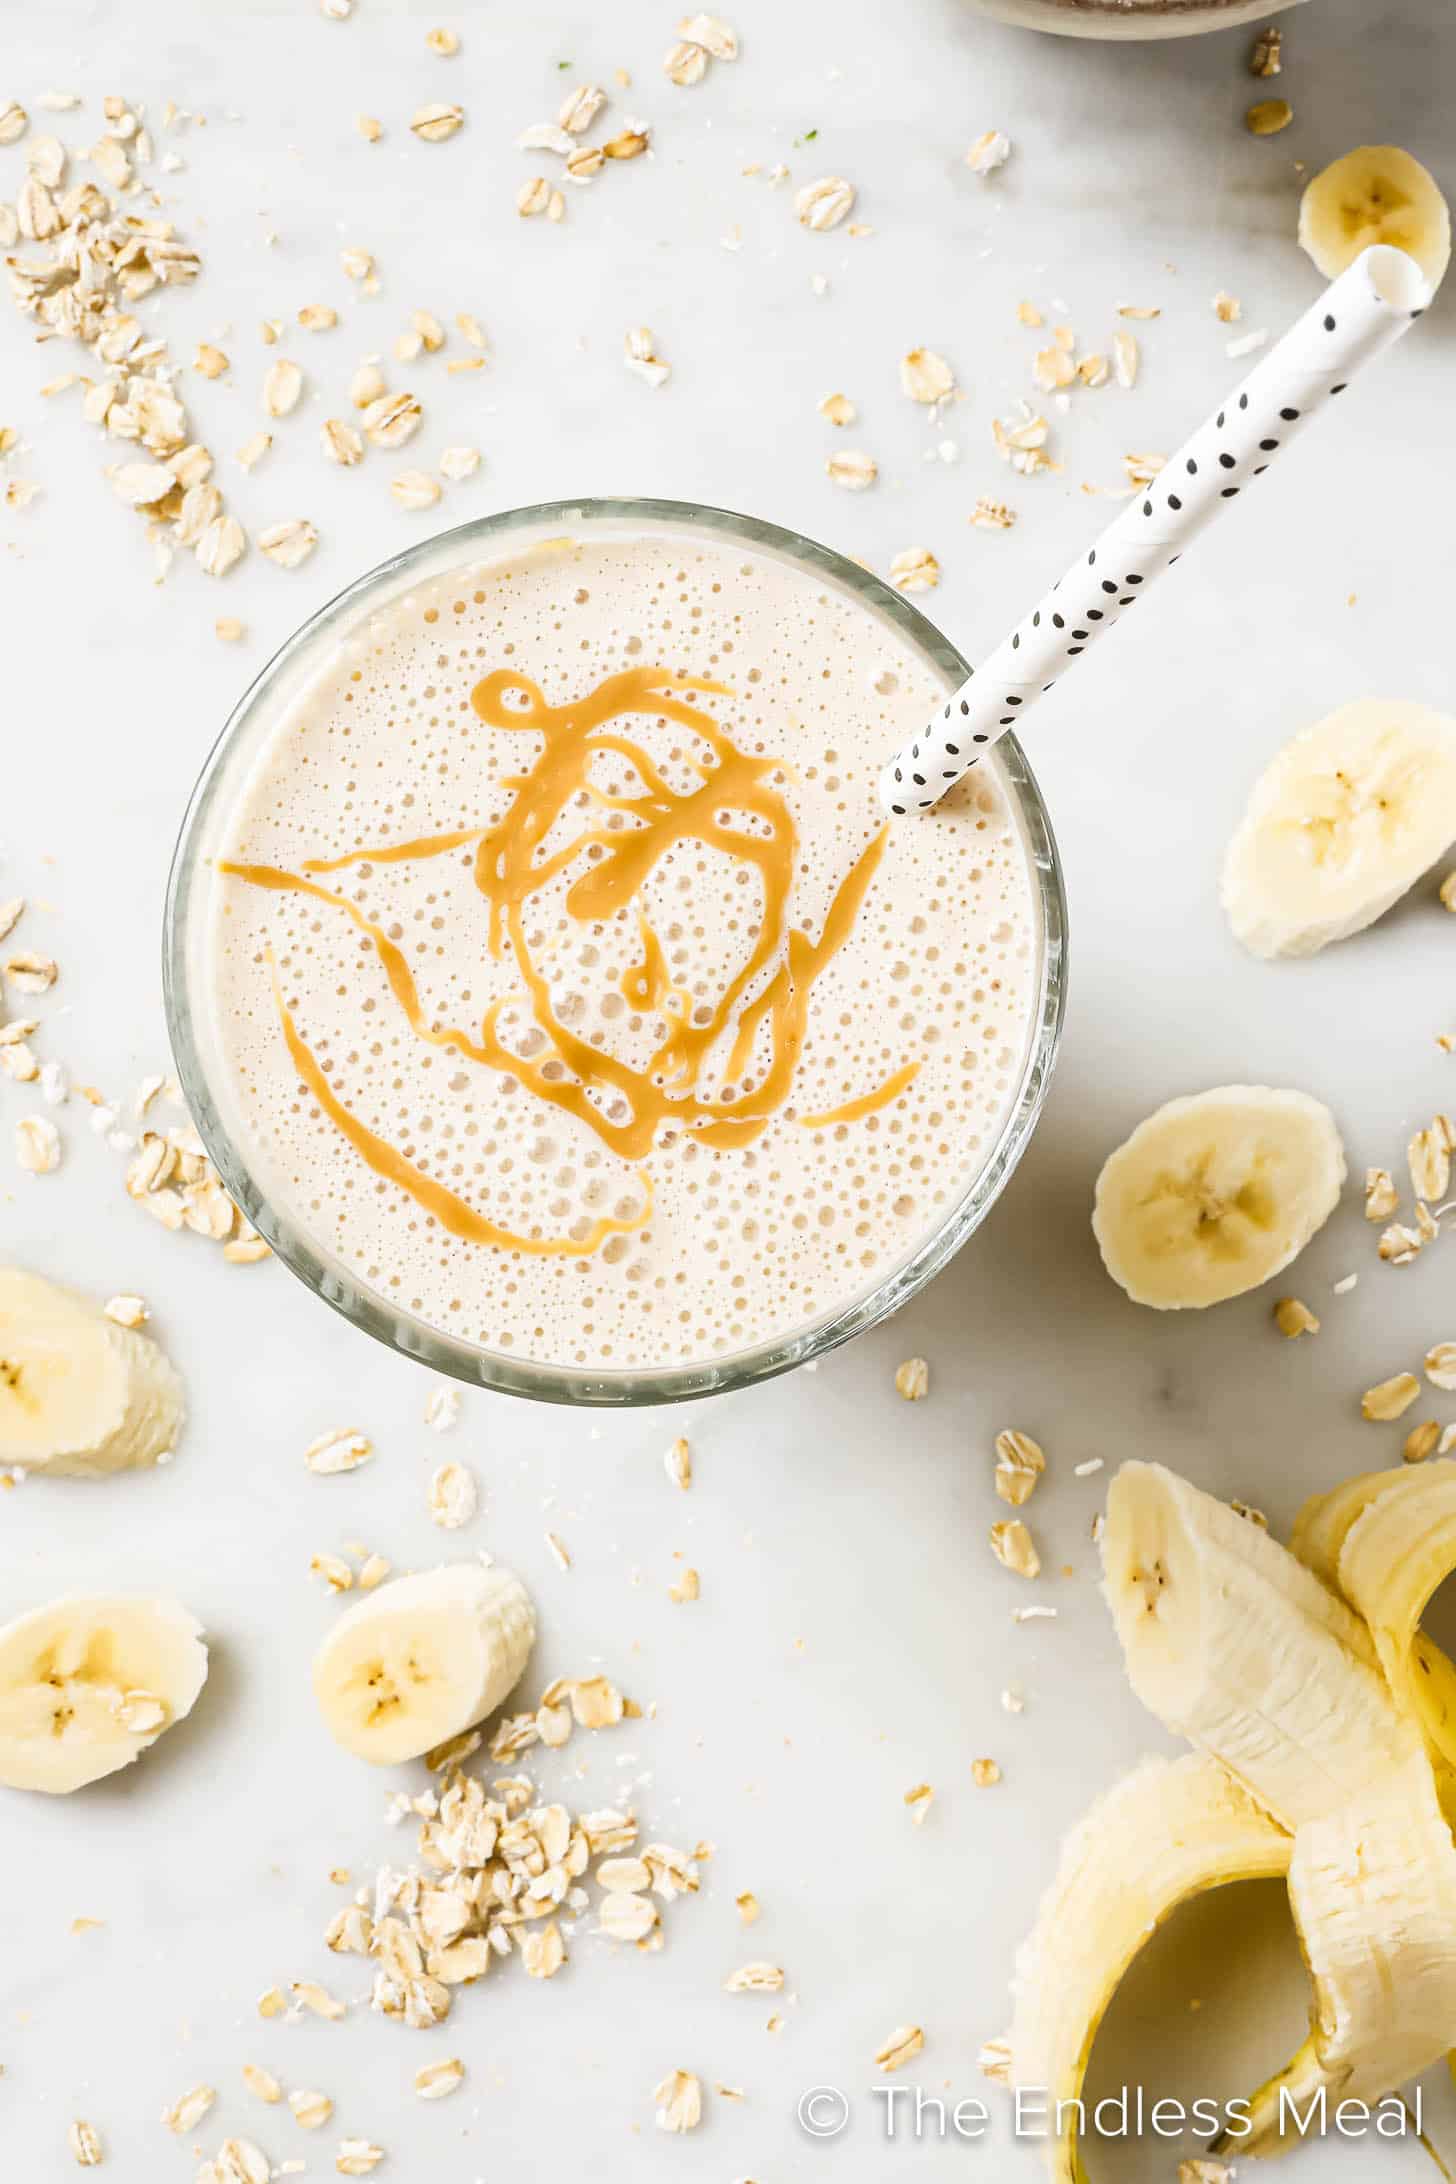 Looking down on a Banana Bread Smoothie.